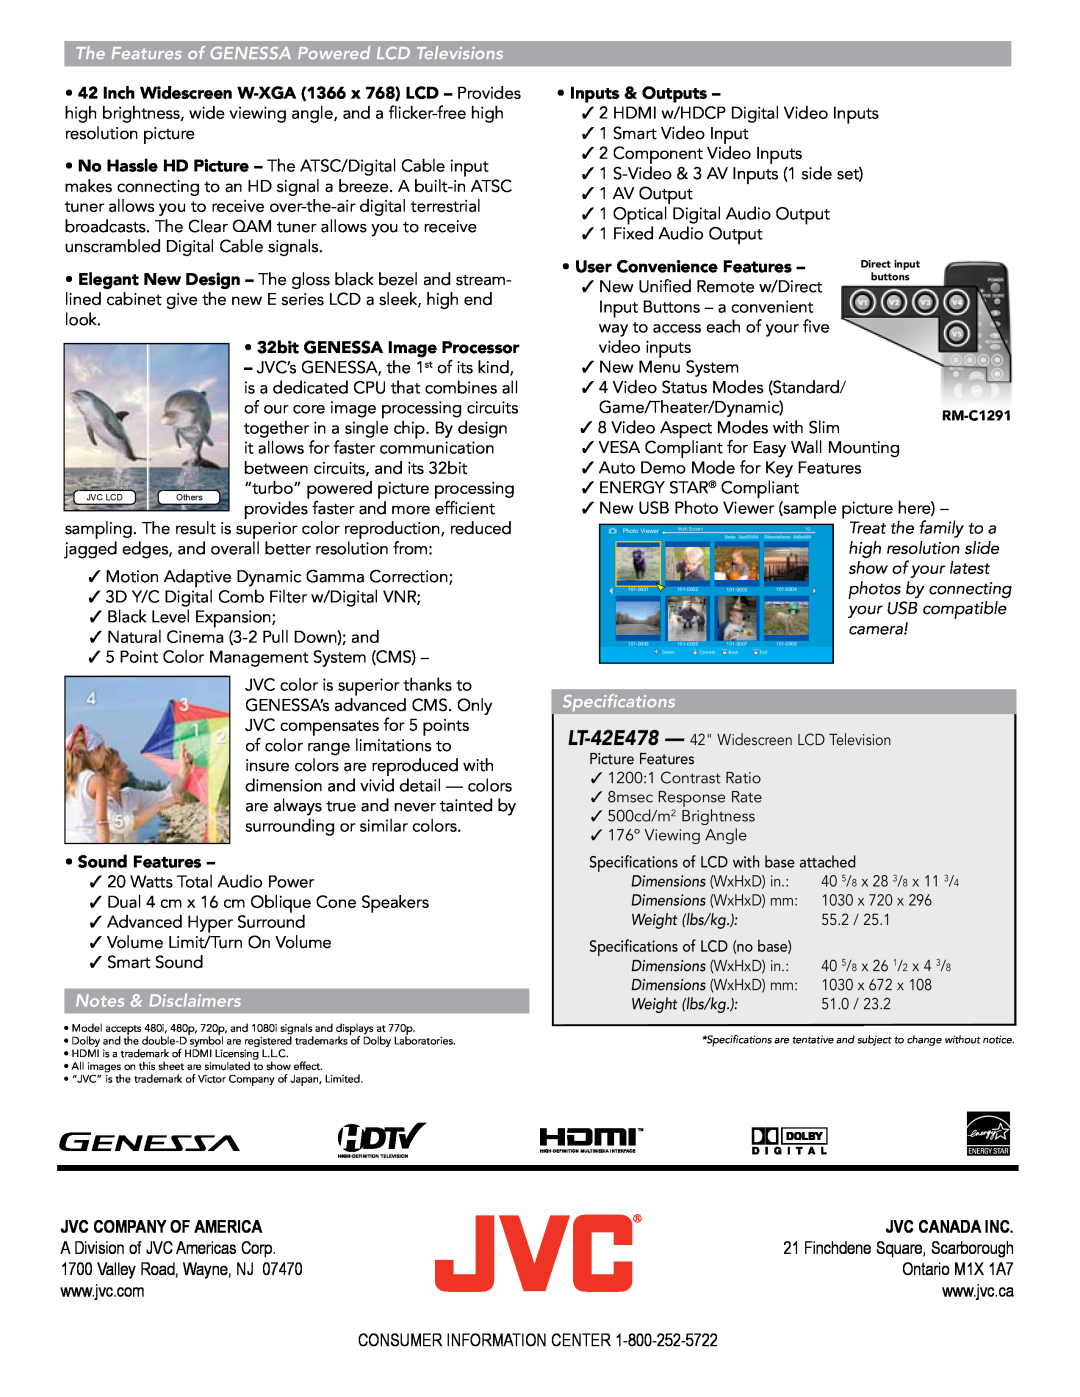 JVC LT-42E478 manual The Features of GENESSA Powered LCD Televisions, 32bit GENESSA Image Processor, Sound Features 